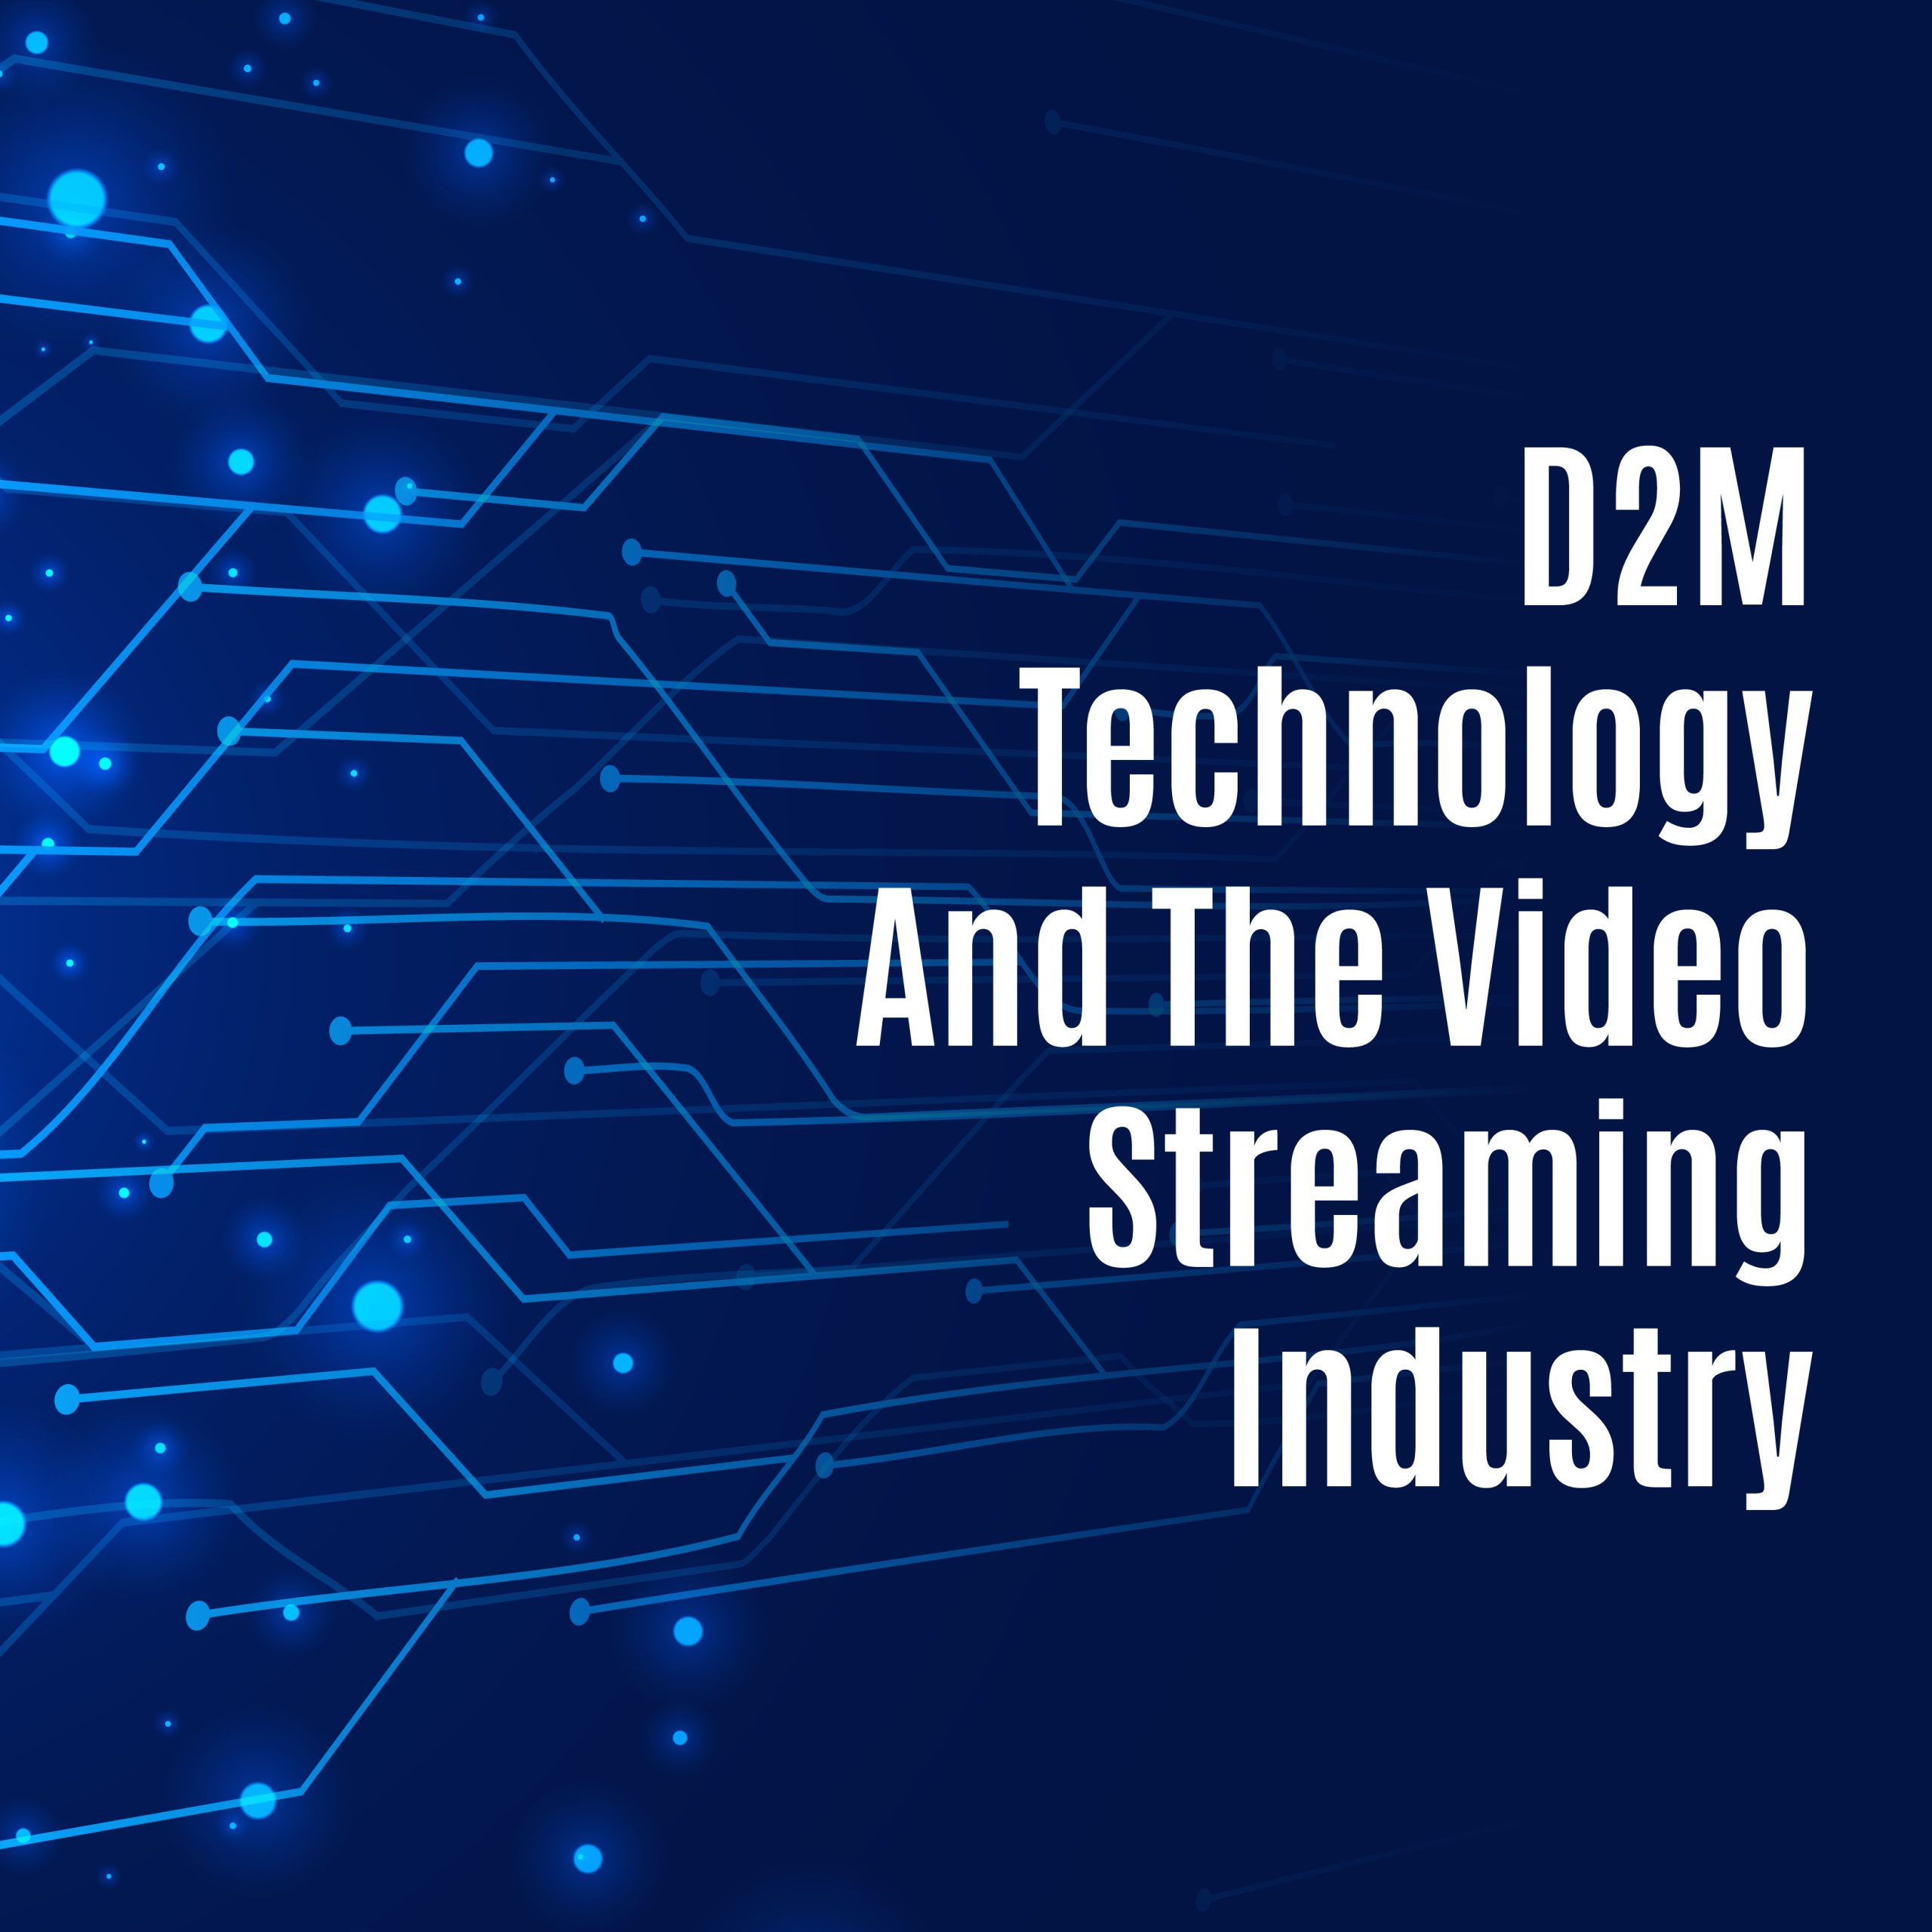 D2M Technology And The Video Streaming Industry